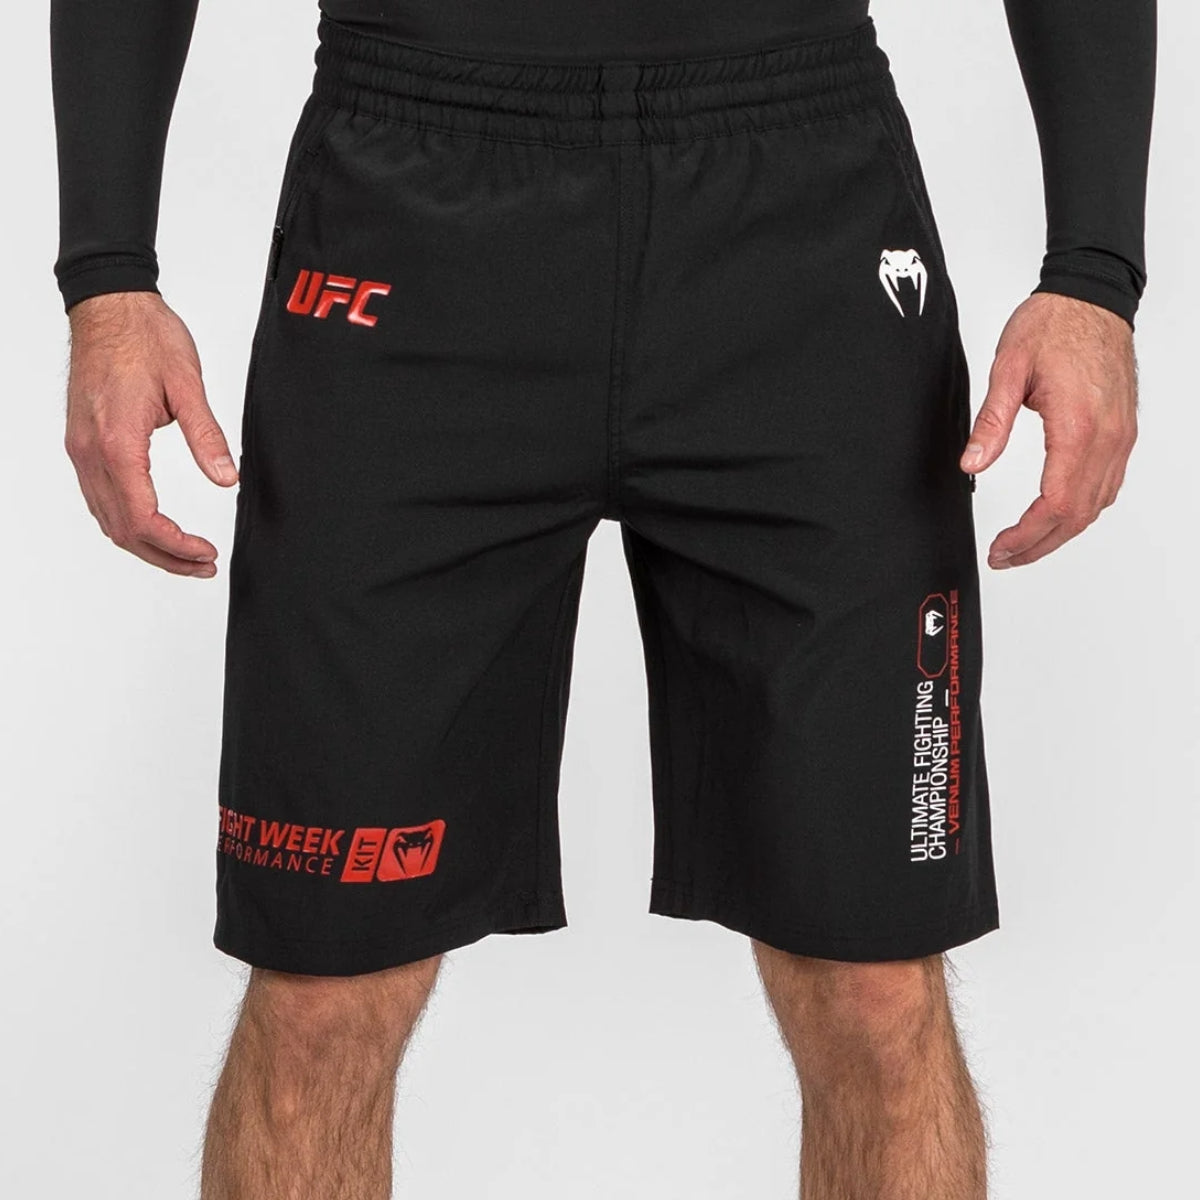 Black Venum UFC Adrenaline Performance Shorts from Made4Fighters